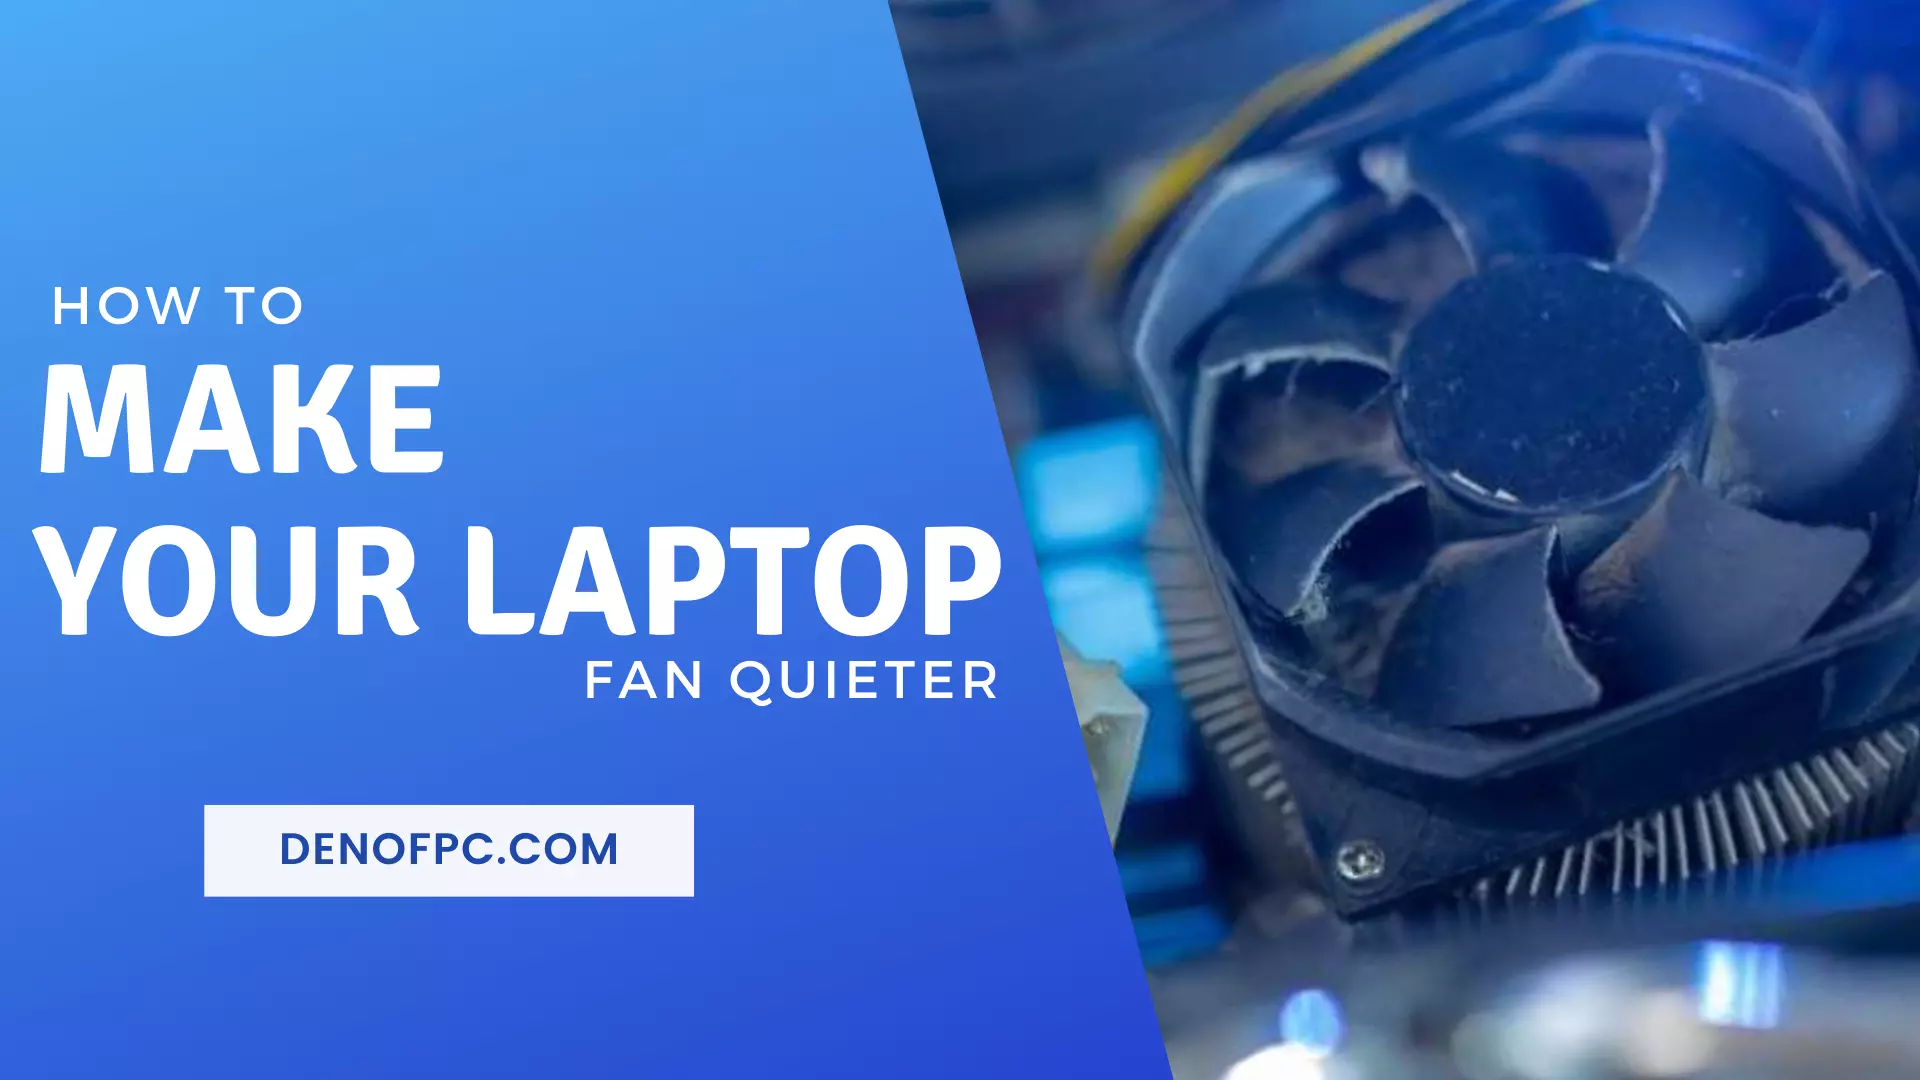 How to Make Your Laptop Fan Quieter